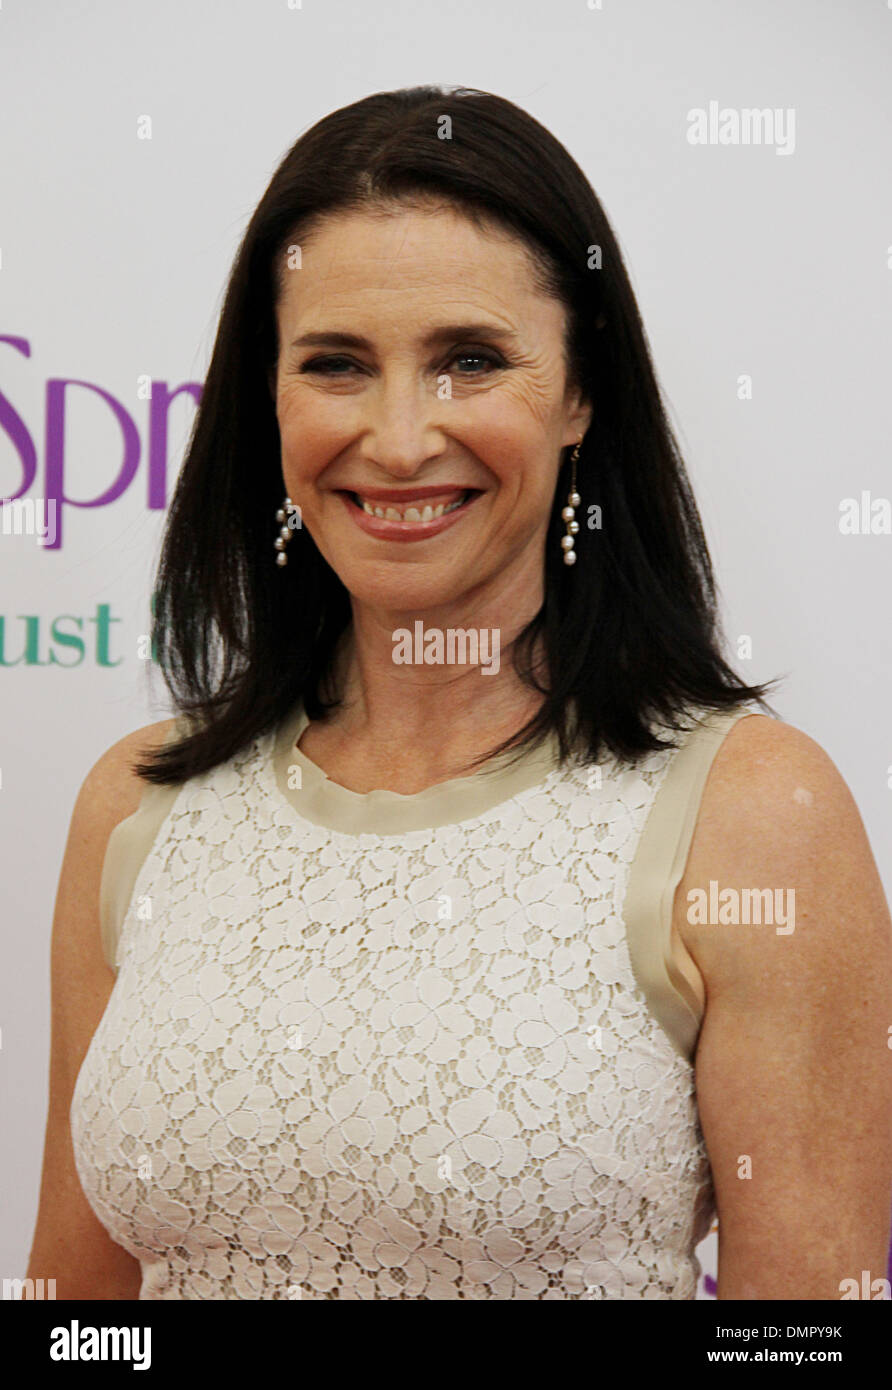 Mimi Rogers Premiere of 'Hope Springs' at the SVA Theater. New York City, USA - 06.08.12 Stock Photo